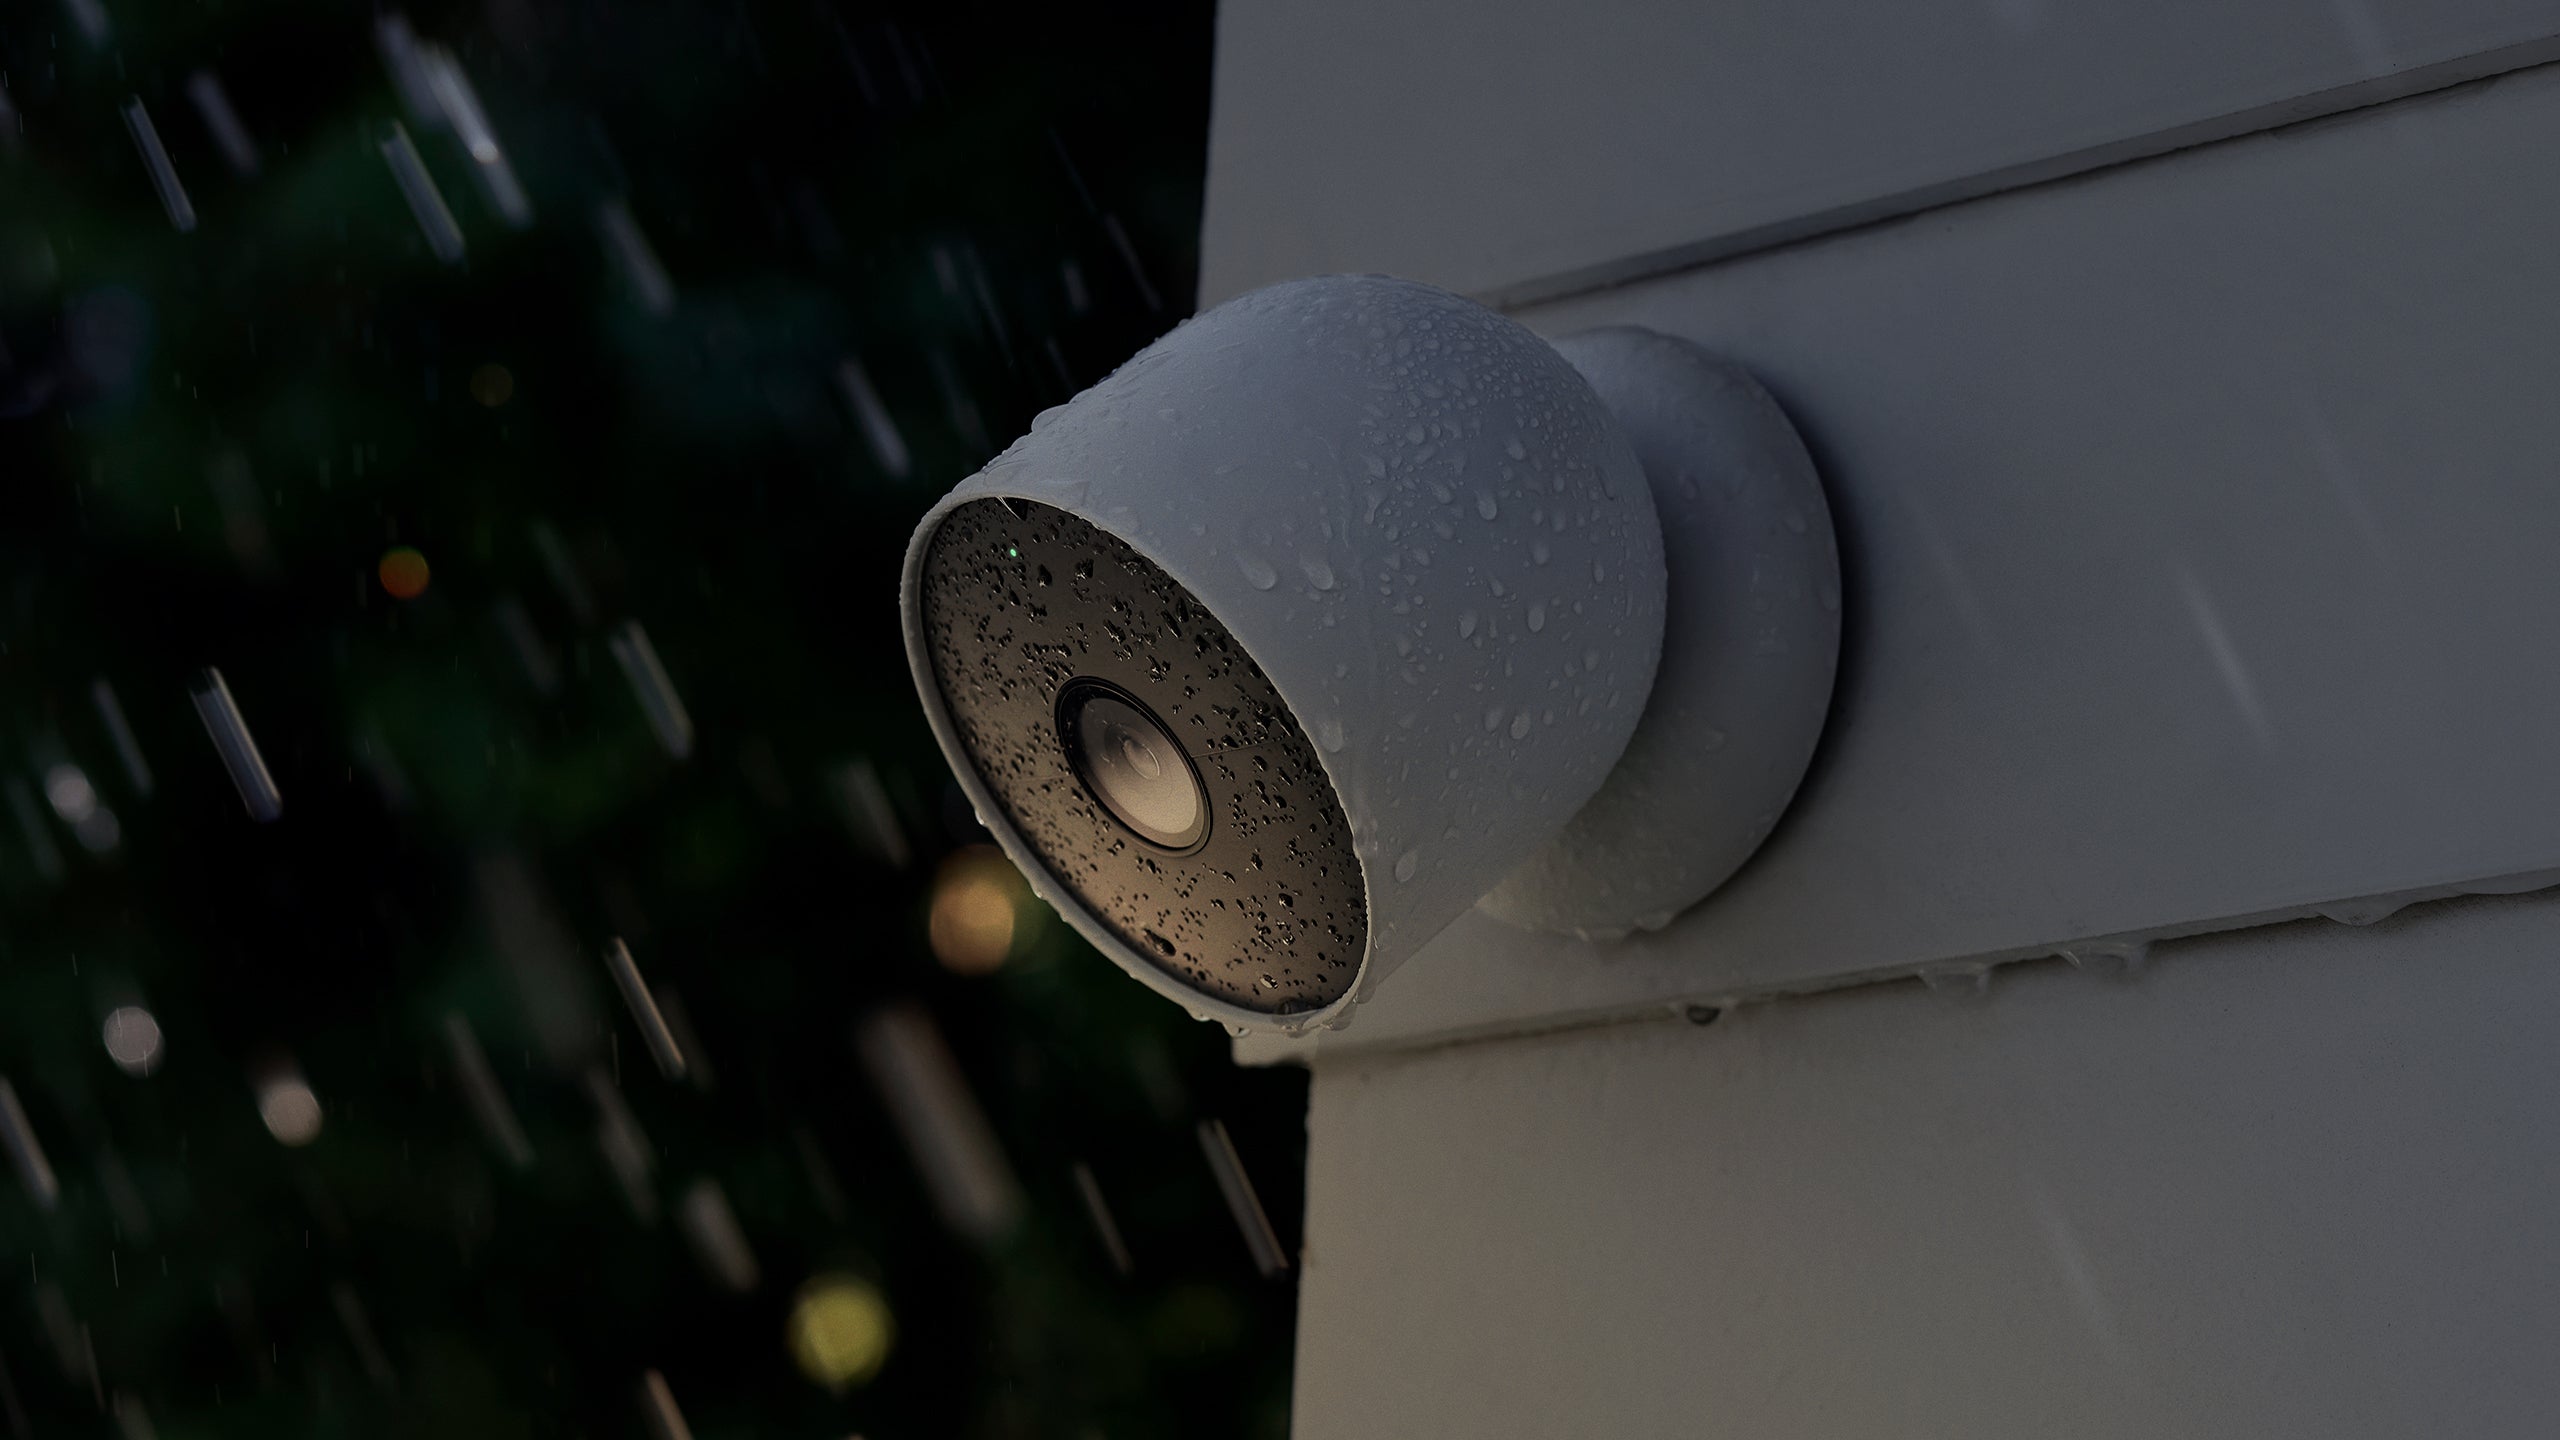 The new indoor/outdoor Nest Cam with battery. (Image: Google)